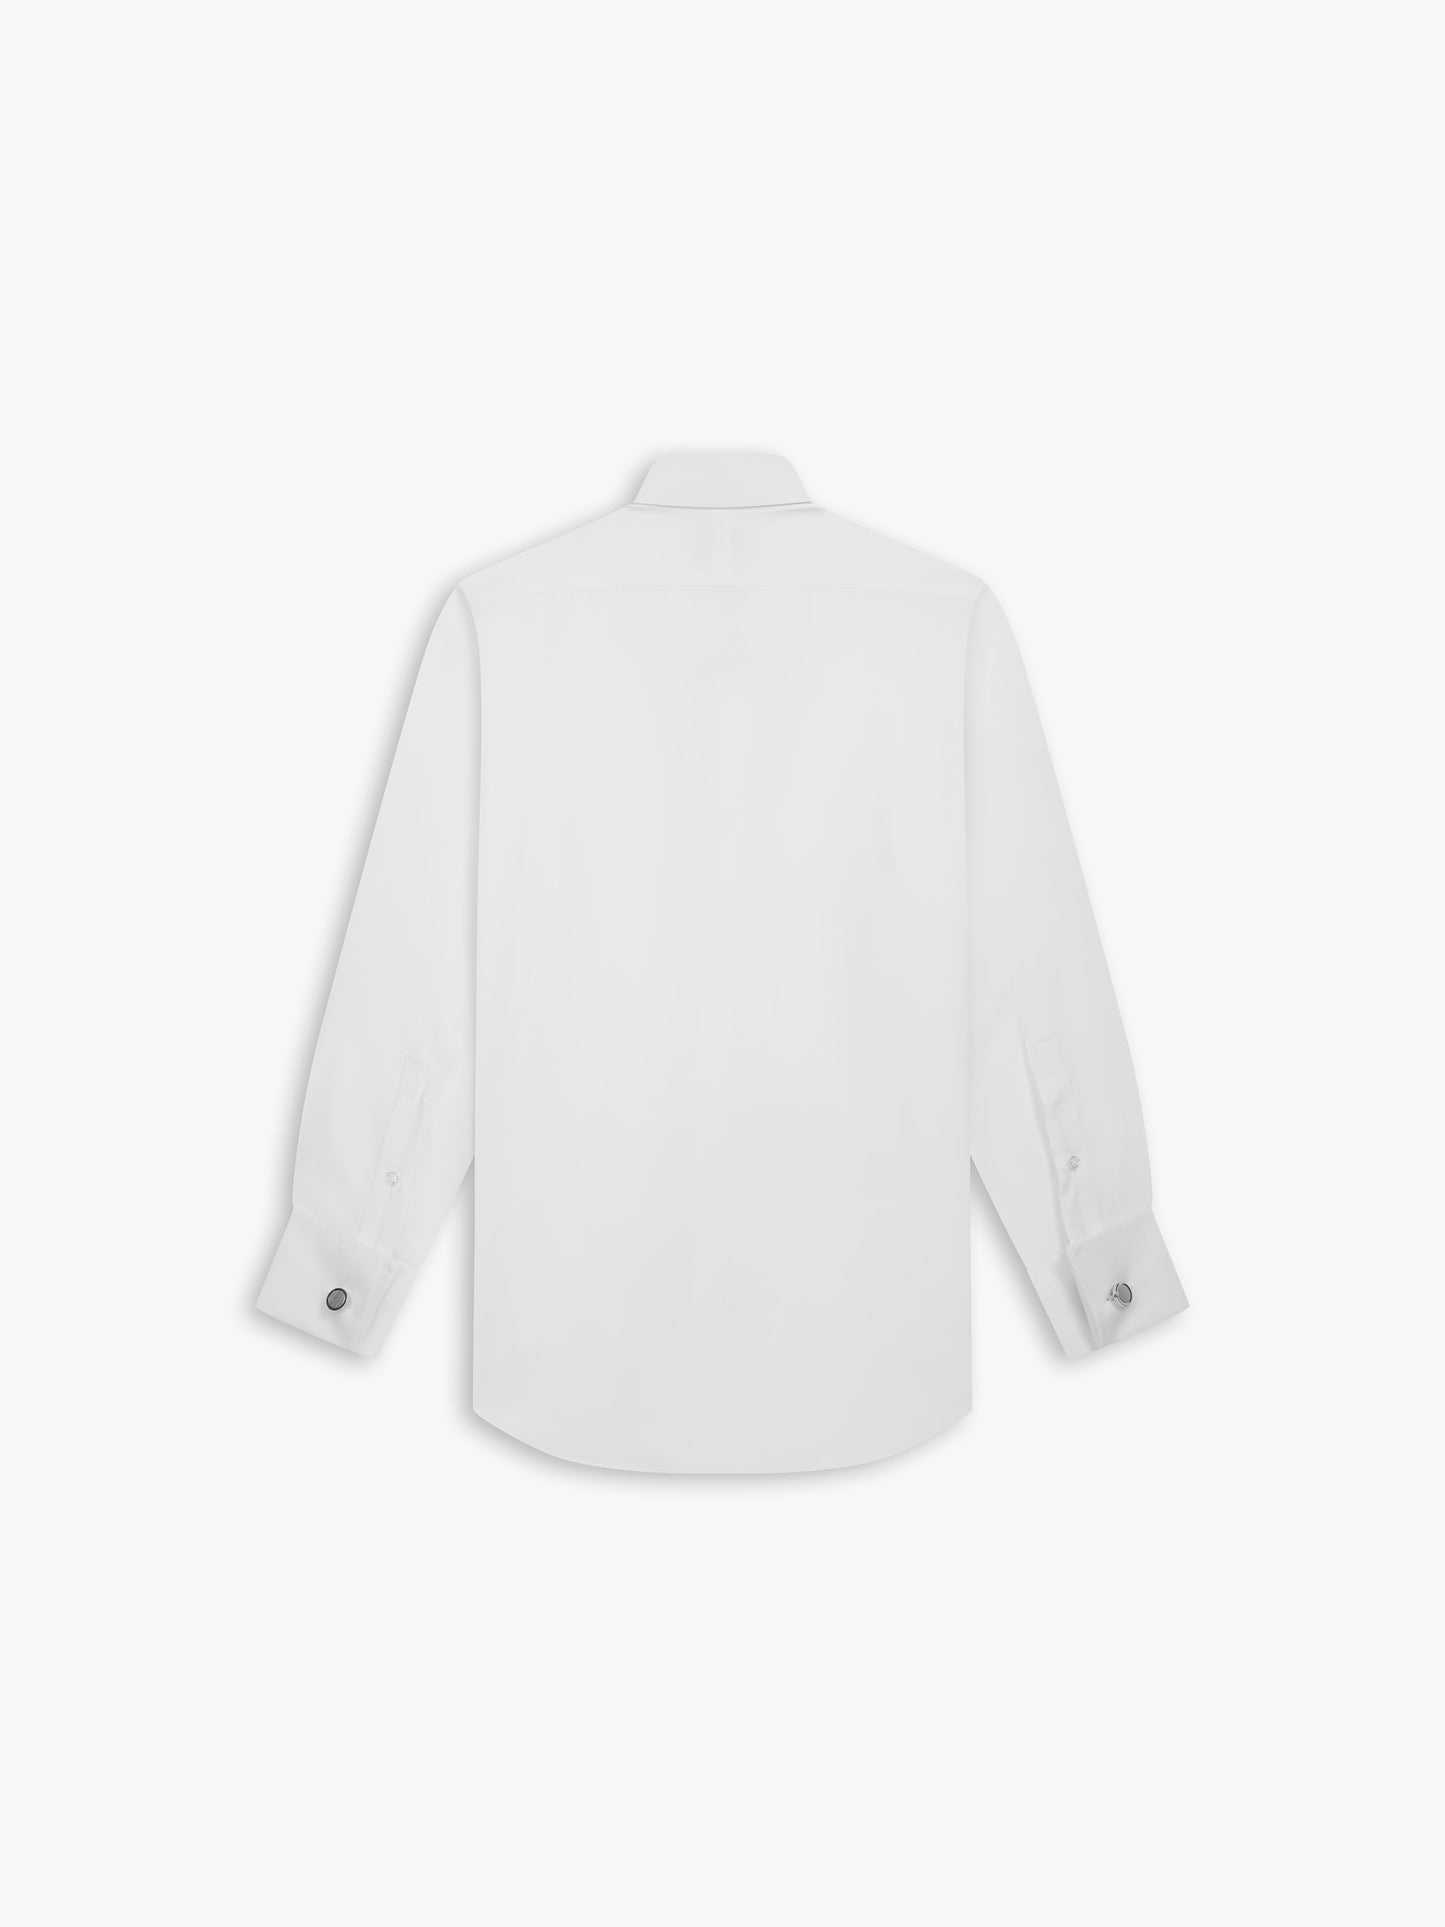 Non-Iron White Oxford Fitted Double Cuff Classic Collar Shirt